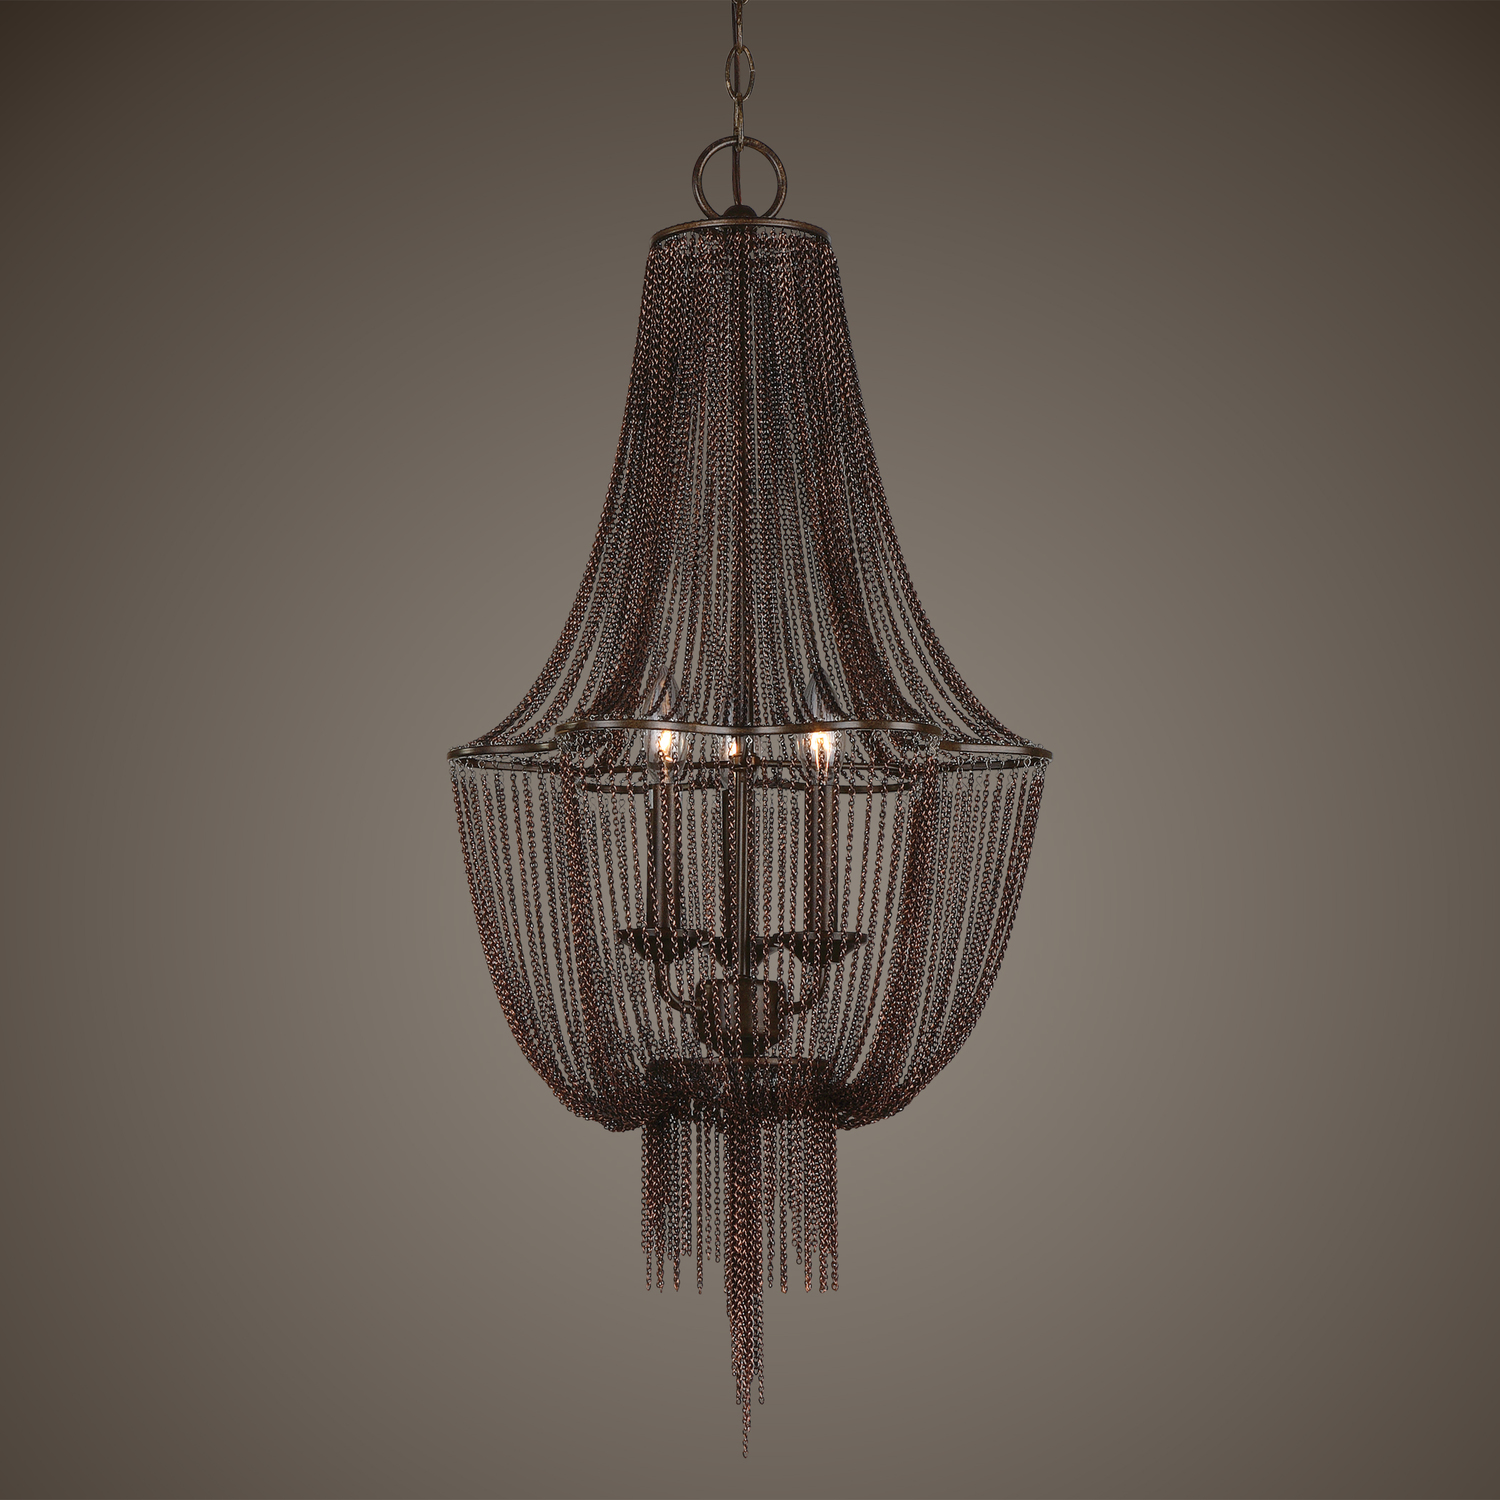 small ceiling light fixture Uttermost Chandeliers Draped Jewelry Chain Finished In A Dark Oil Rubbed Bronze With Gold Highlights. NA